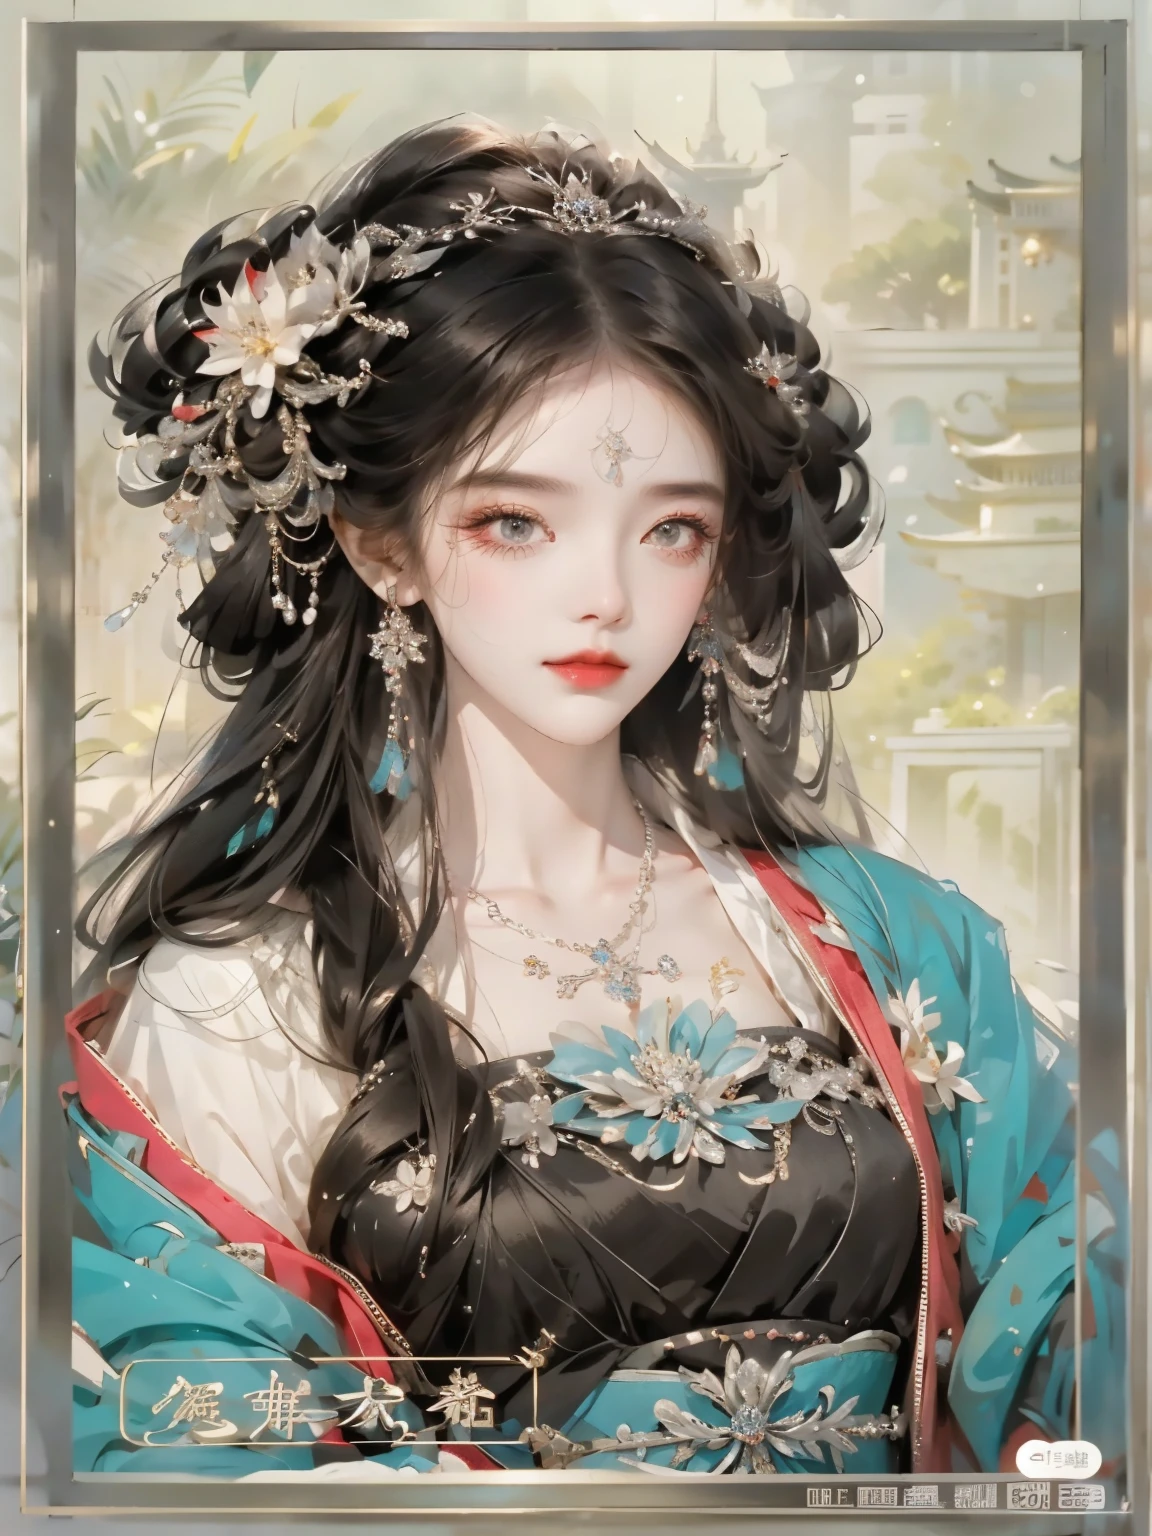 a close up of a woman wearing a tiara and a necklace, beautiful figure painting, palace ， A girl wearing Hanfu, ((beautiful fantasy queen)), beautiful fantasy queen, Inspired by Lan Ying, Inspired by Qiu Ying, chinese princess, Chinese art style, Chinese style, guweiz style artwork, Inspired by Du Qiong